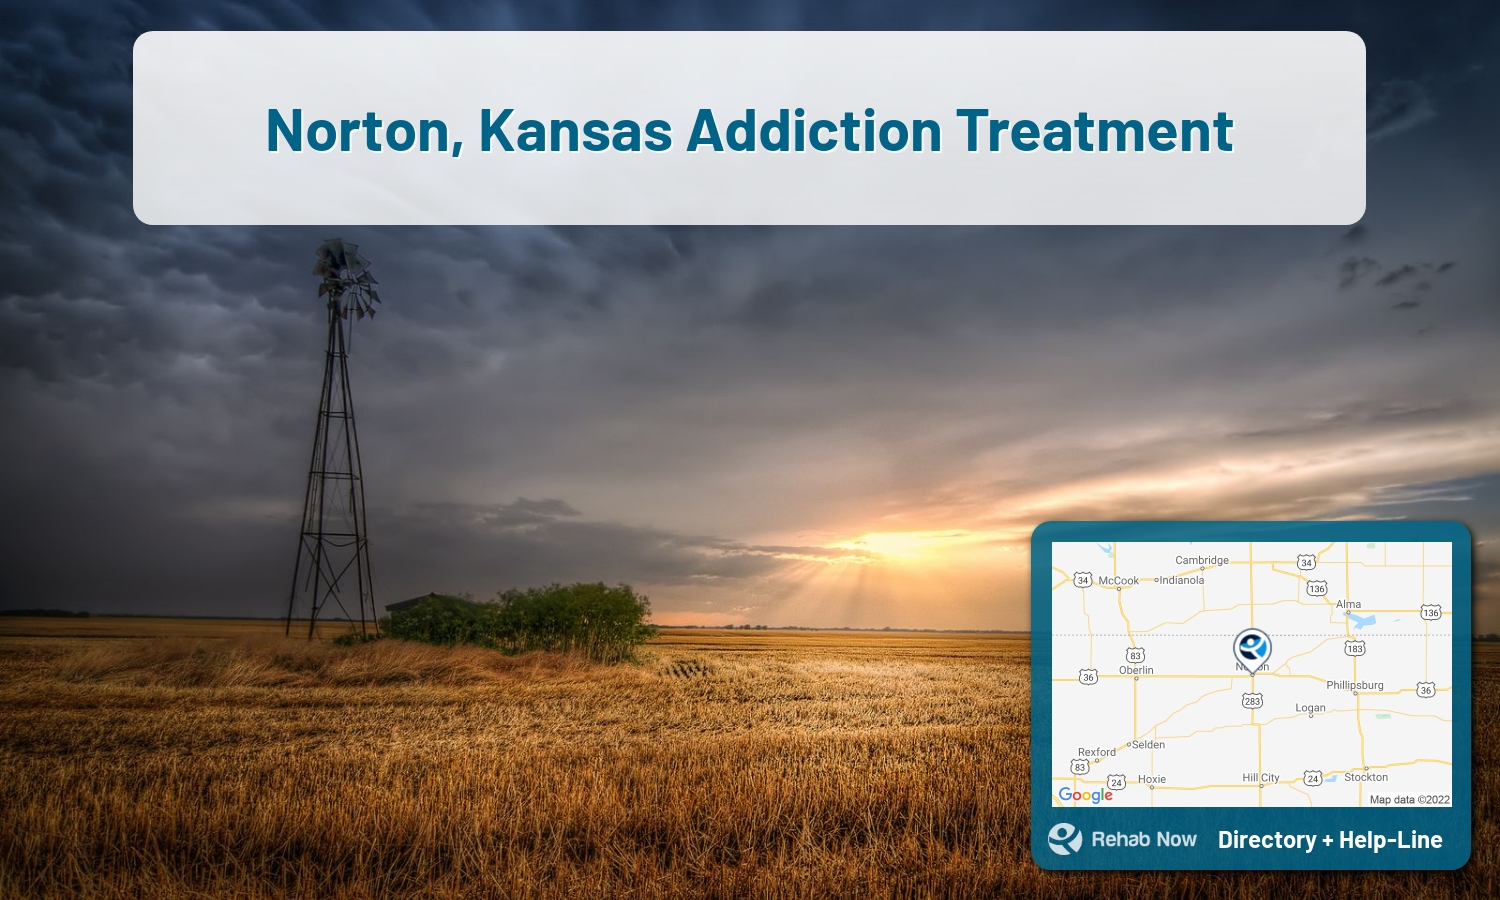 View options, availability, treatment methods, and more, for drug rehab and alcohol treatment in Norton, Kansas